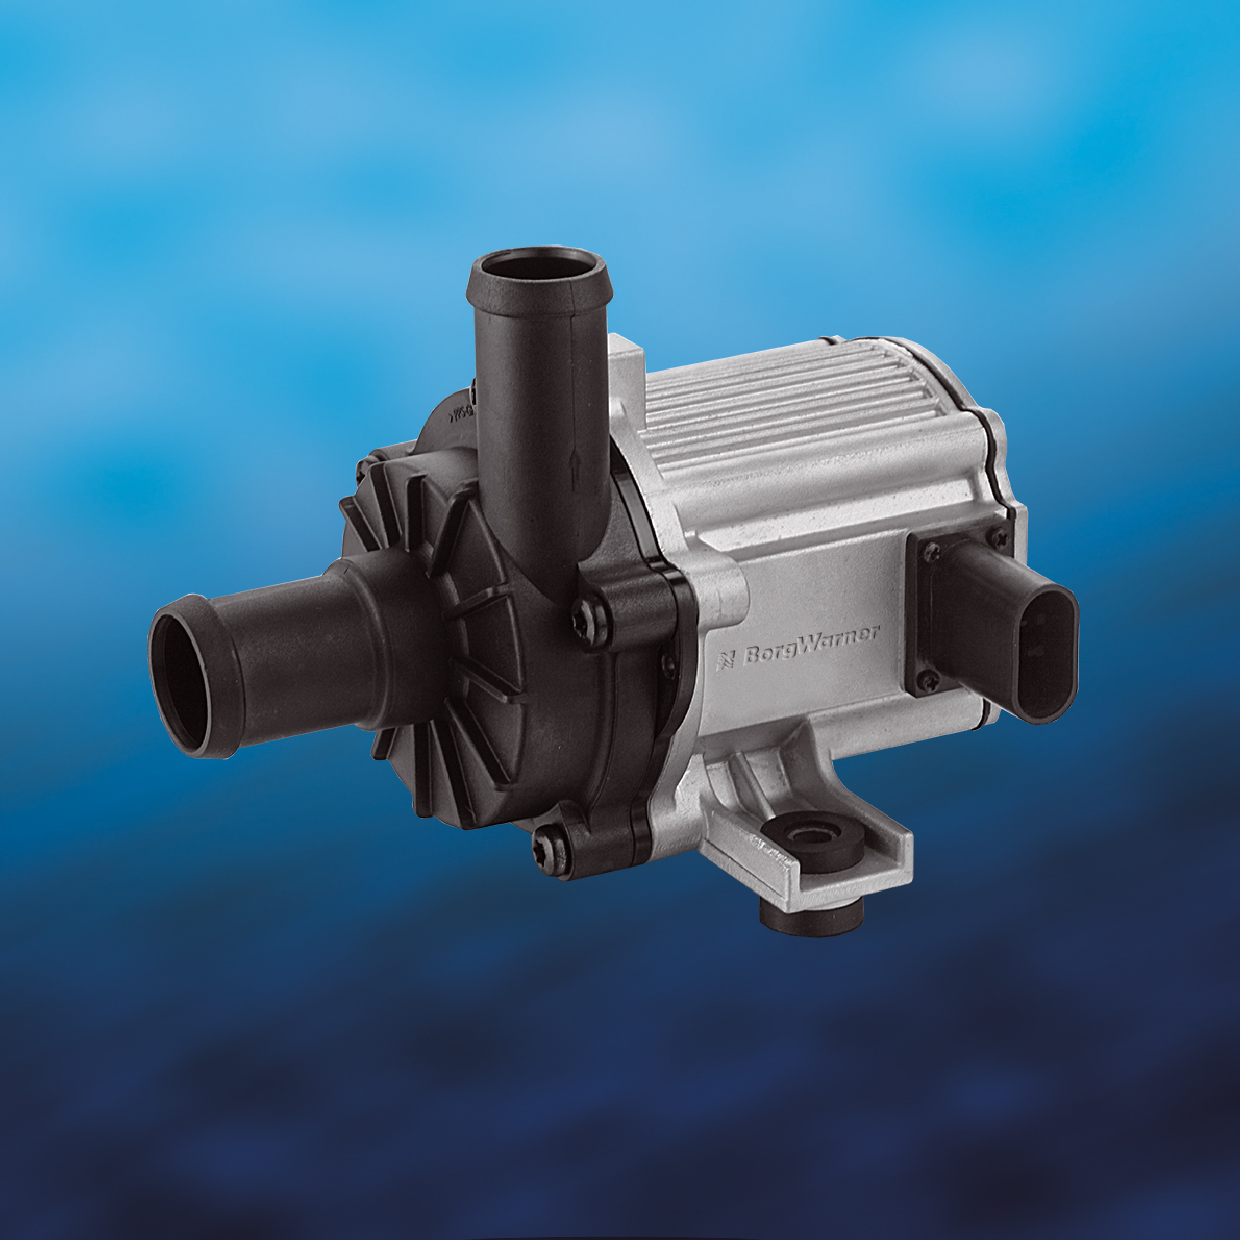 BorgWarner’s auxiliary thermal coolant pump (ATCP) drives coolant flow through auxiliary coolant circuits to help maintain optimal temperature for auxiliary components during normal vehicle operation as well as when the engine is shut down.